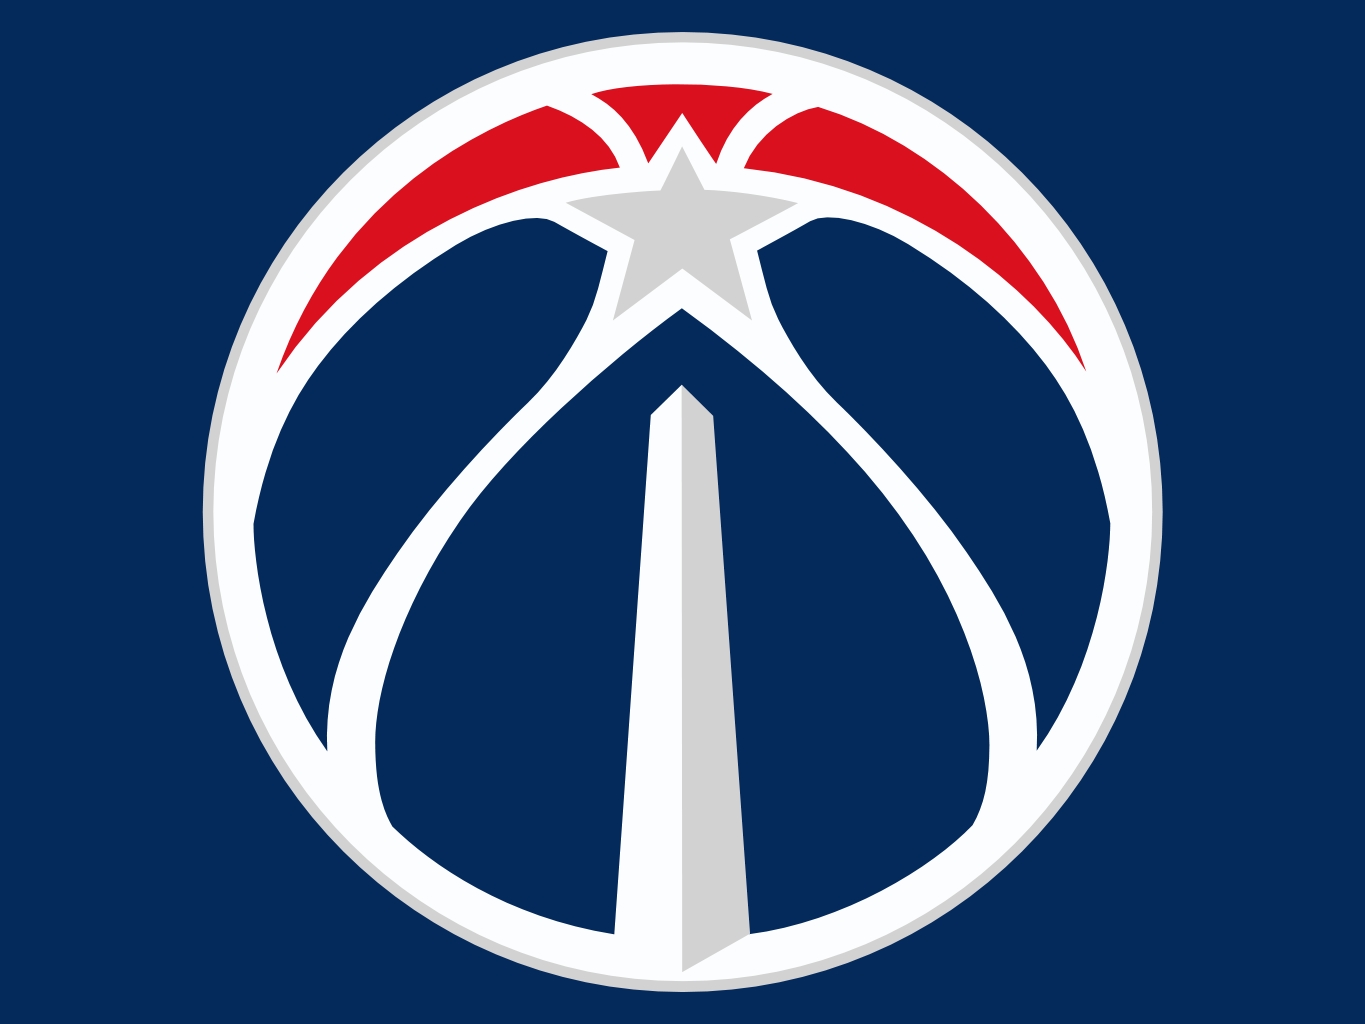 Washington Wizards Symbol Download In Hd Quality